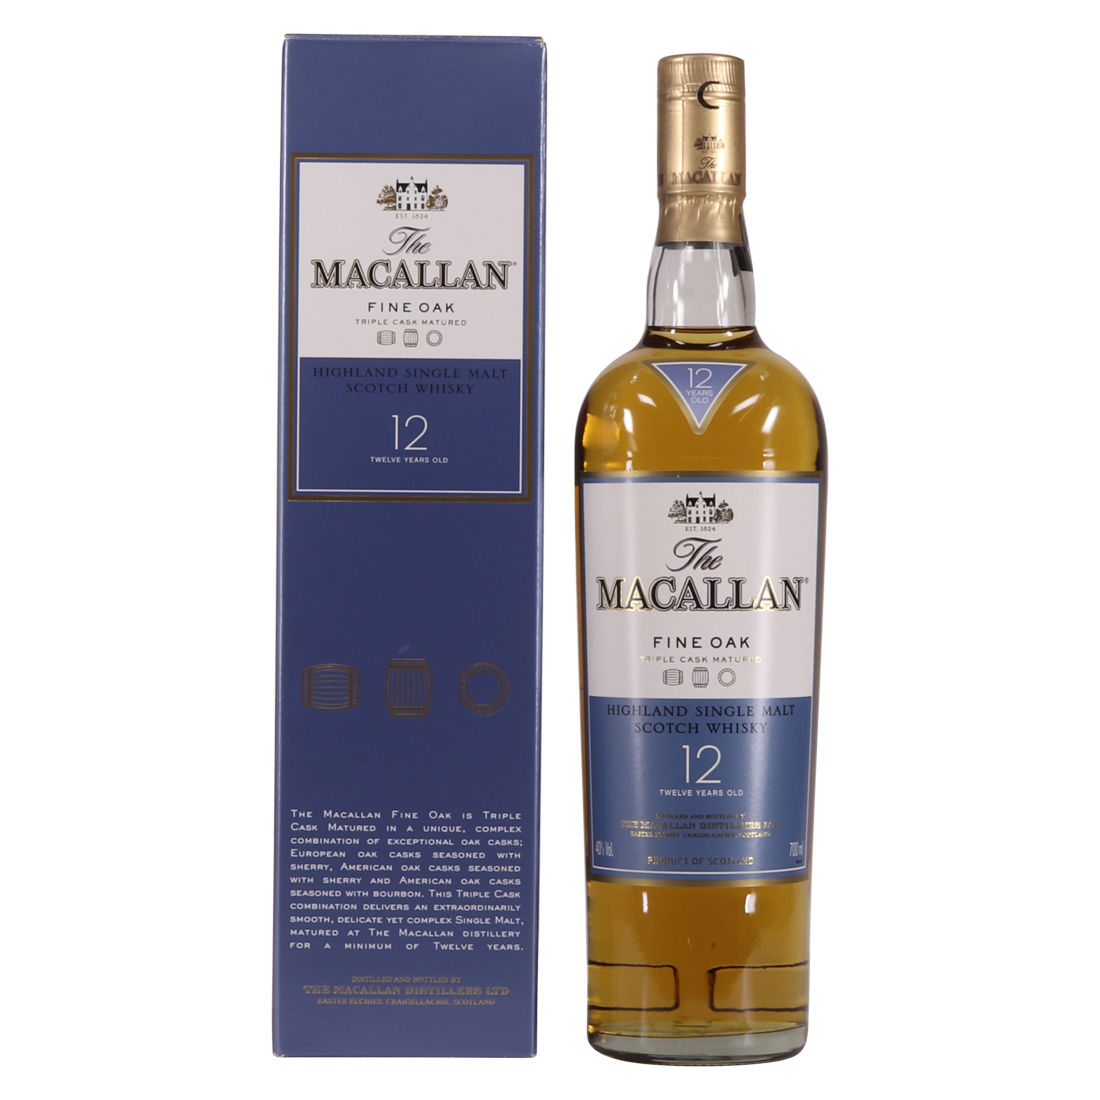 Macallan 12 Year Old Fine Oak Auction The Grand Whisky Auction